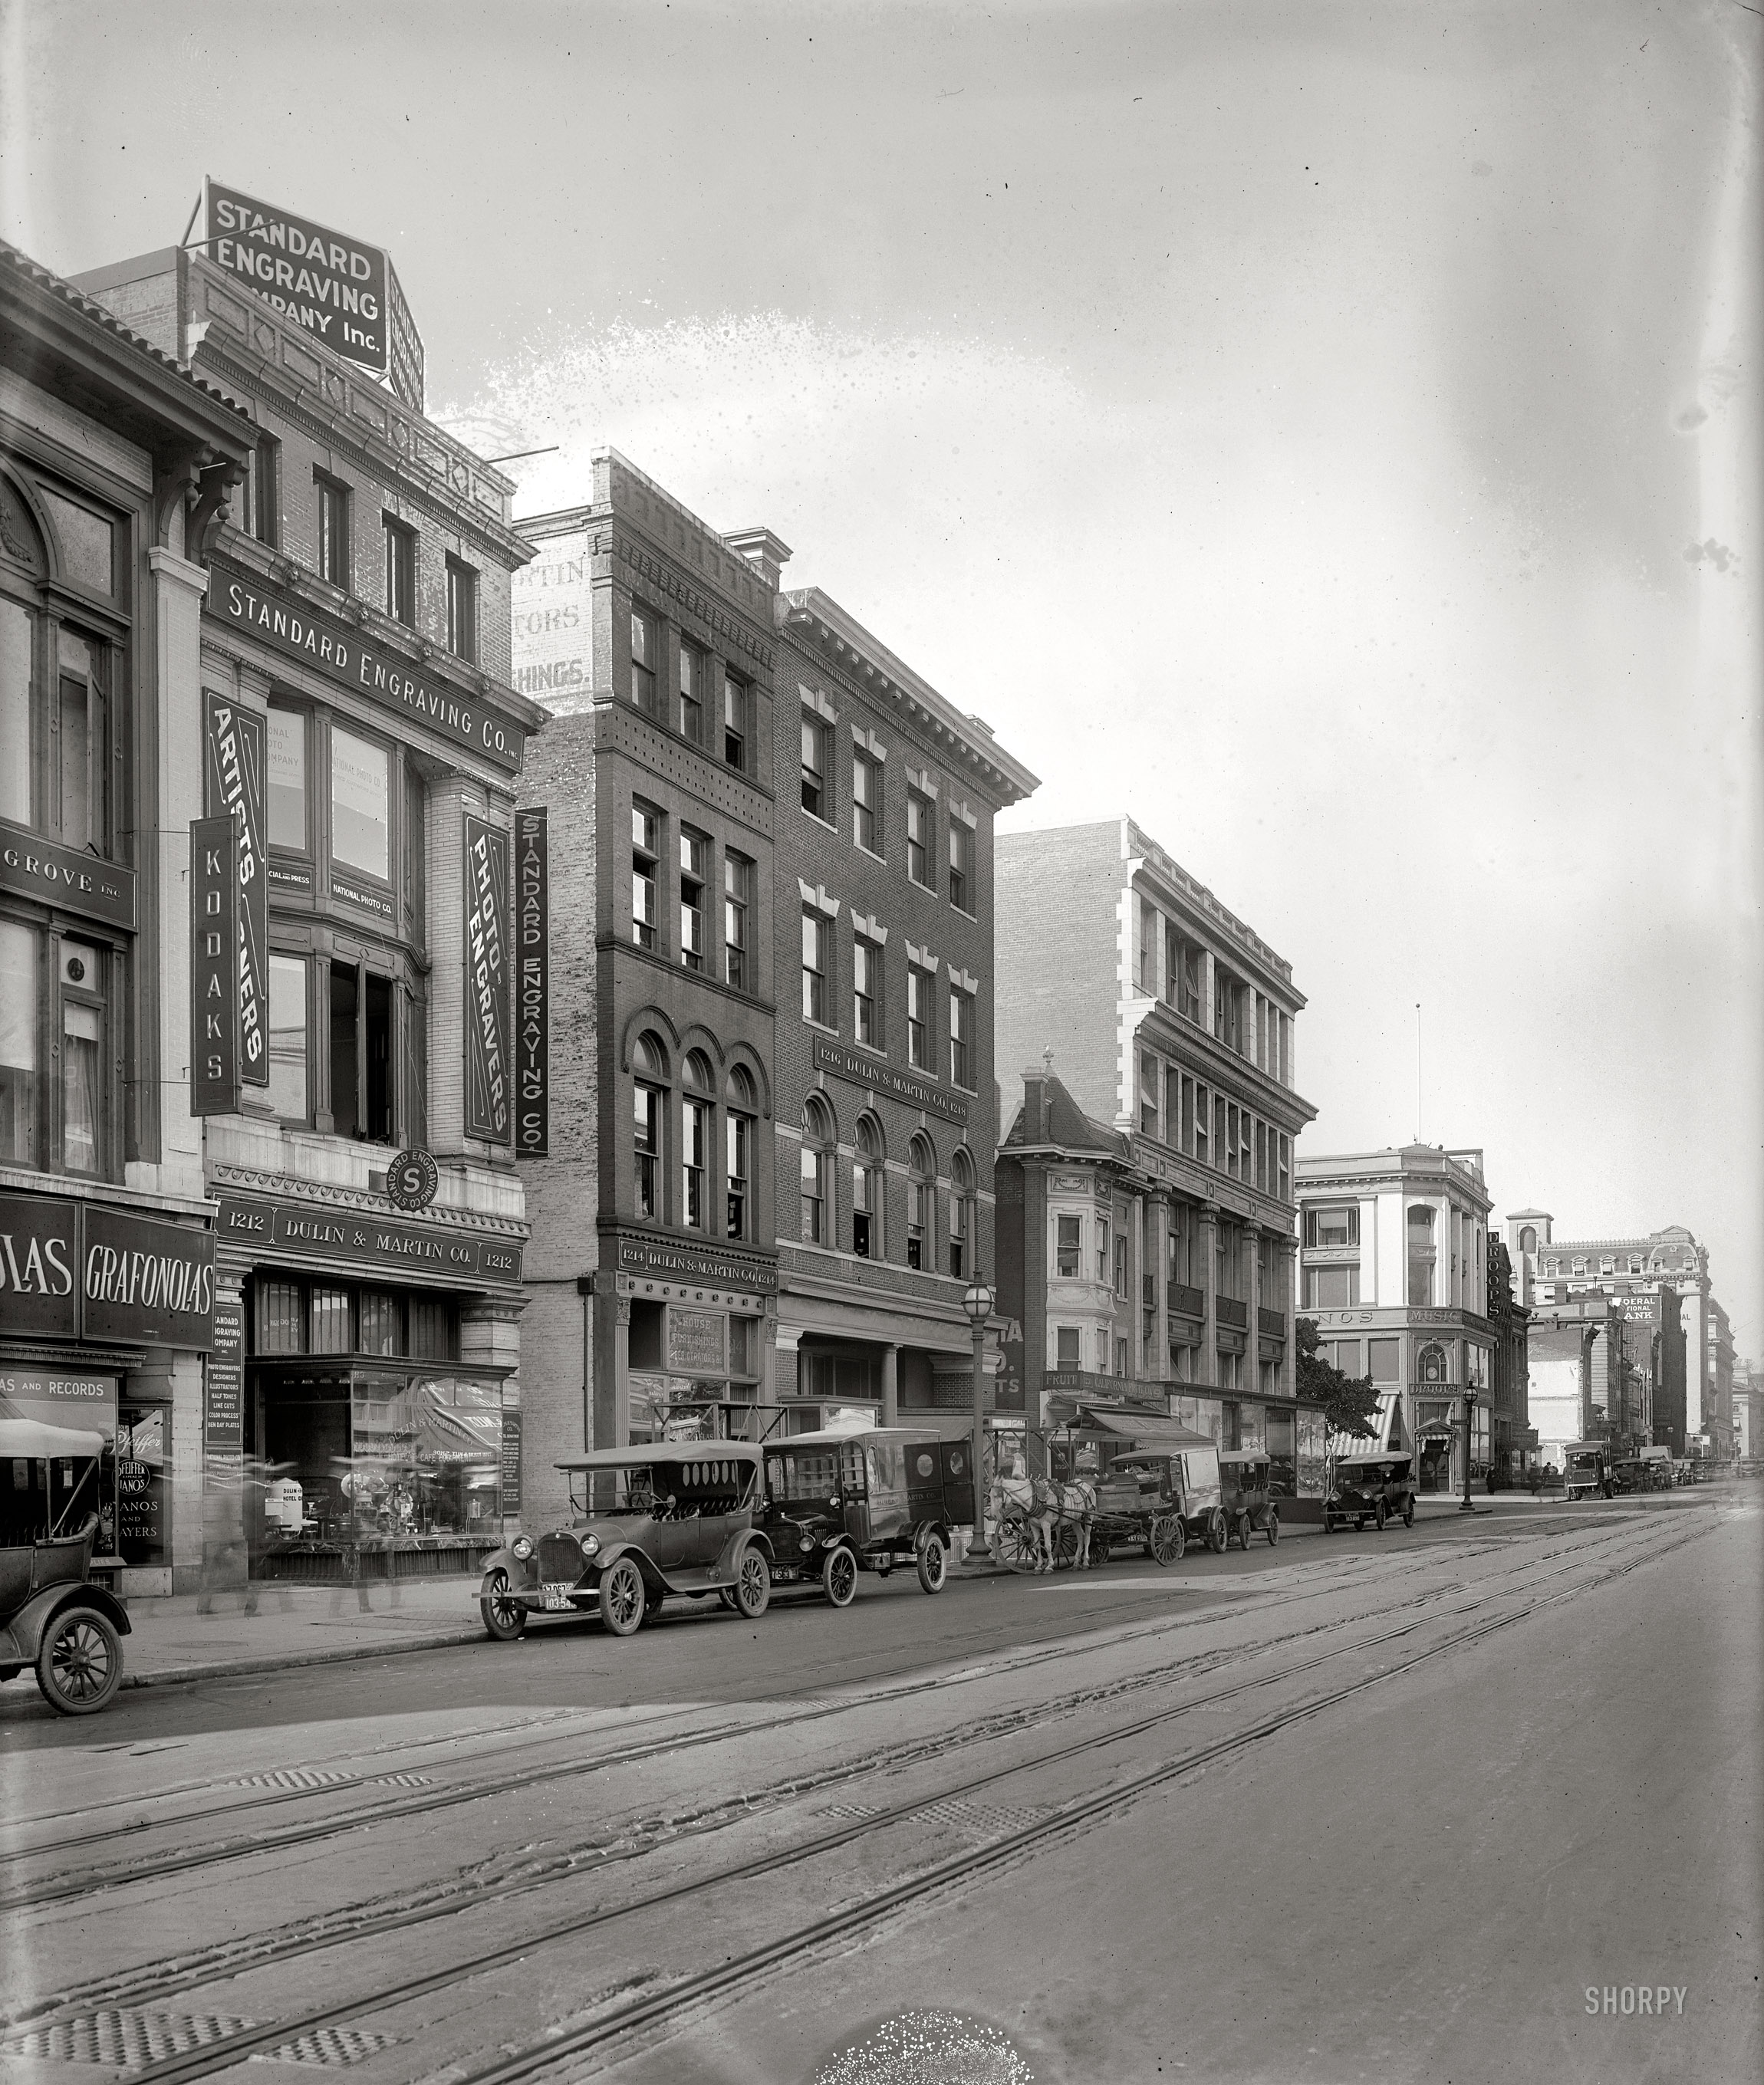 Washington, D.C., circa 1920. " Standard Engraving building, 1212 G Street N.W." National Photo Company Collection glass negative. View full size.